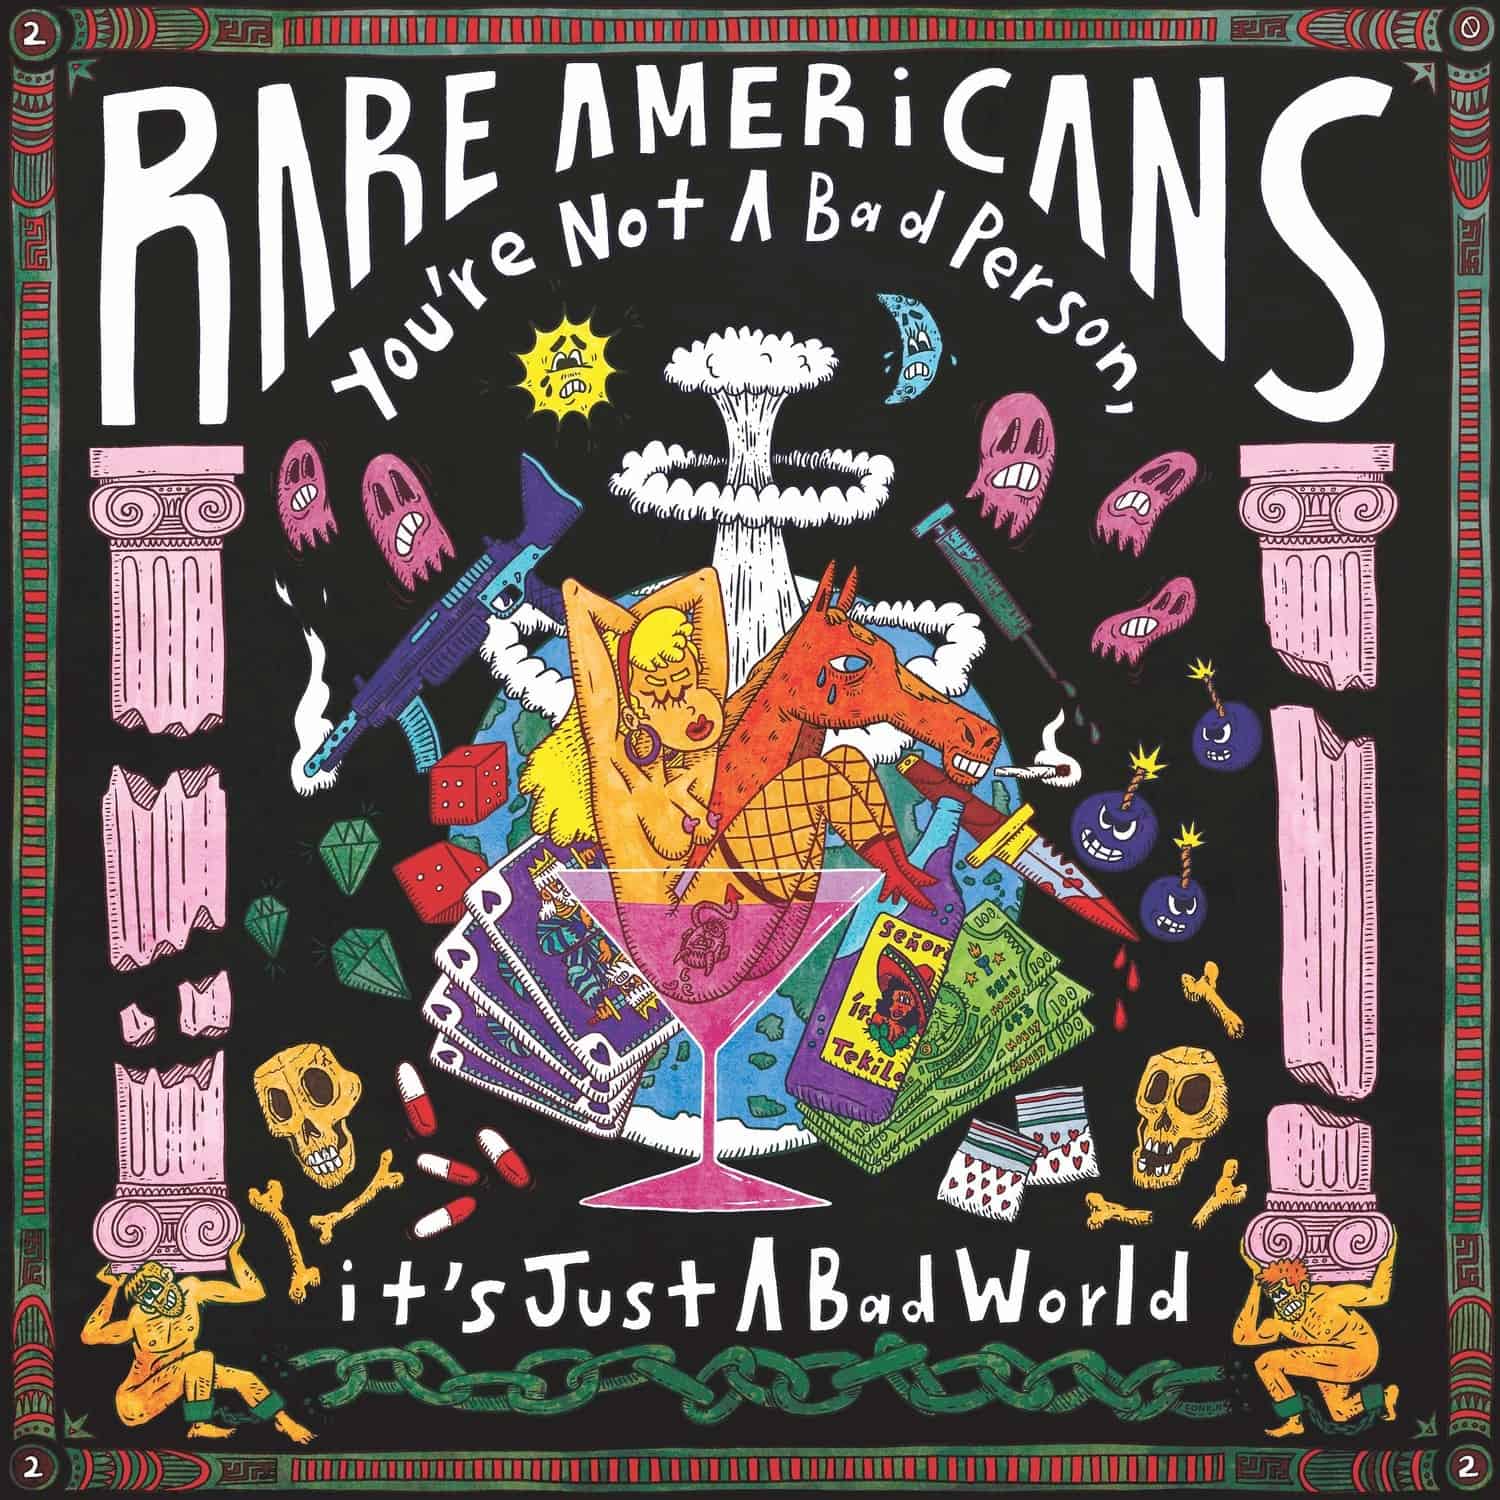 Rare Americans - YOURE NOT A BAD PERSON ITS JUST A BAD WORLD 